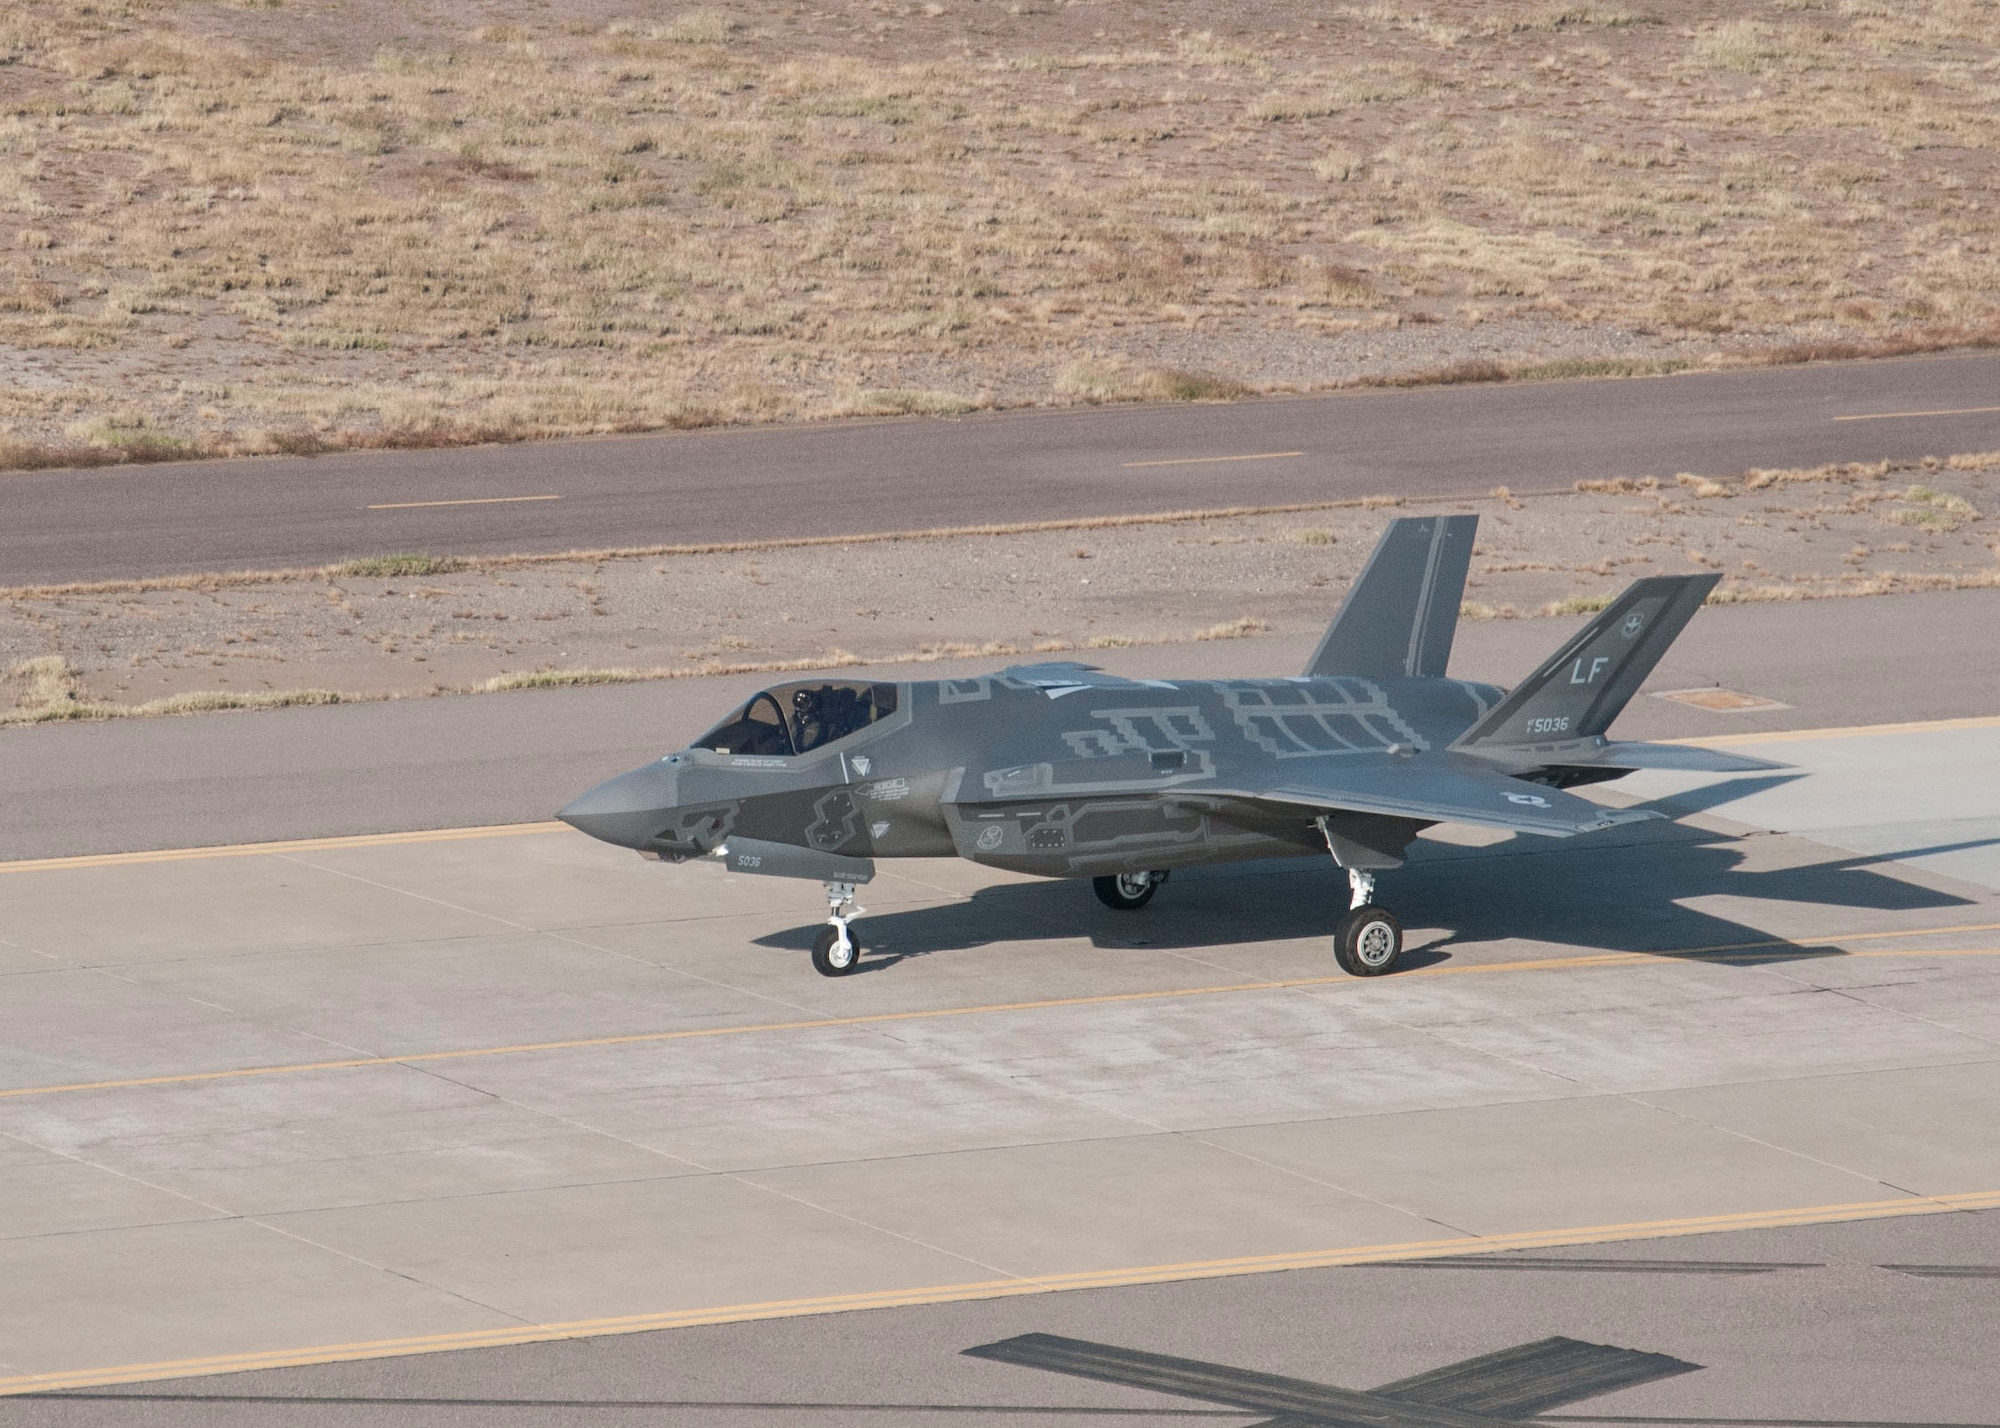 An F-35 fighter jet stands on a runway at Luke Air Force Base, Arizona, in December 2014. Luke will eventually be home to 144 F-35s, making it the largest F-35 air base in the world. (U.S. Air Force Photo/Released/Monica Guevara)